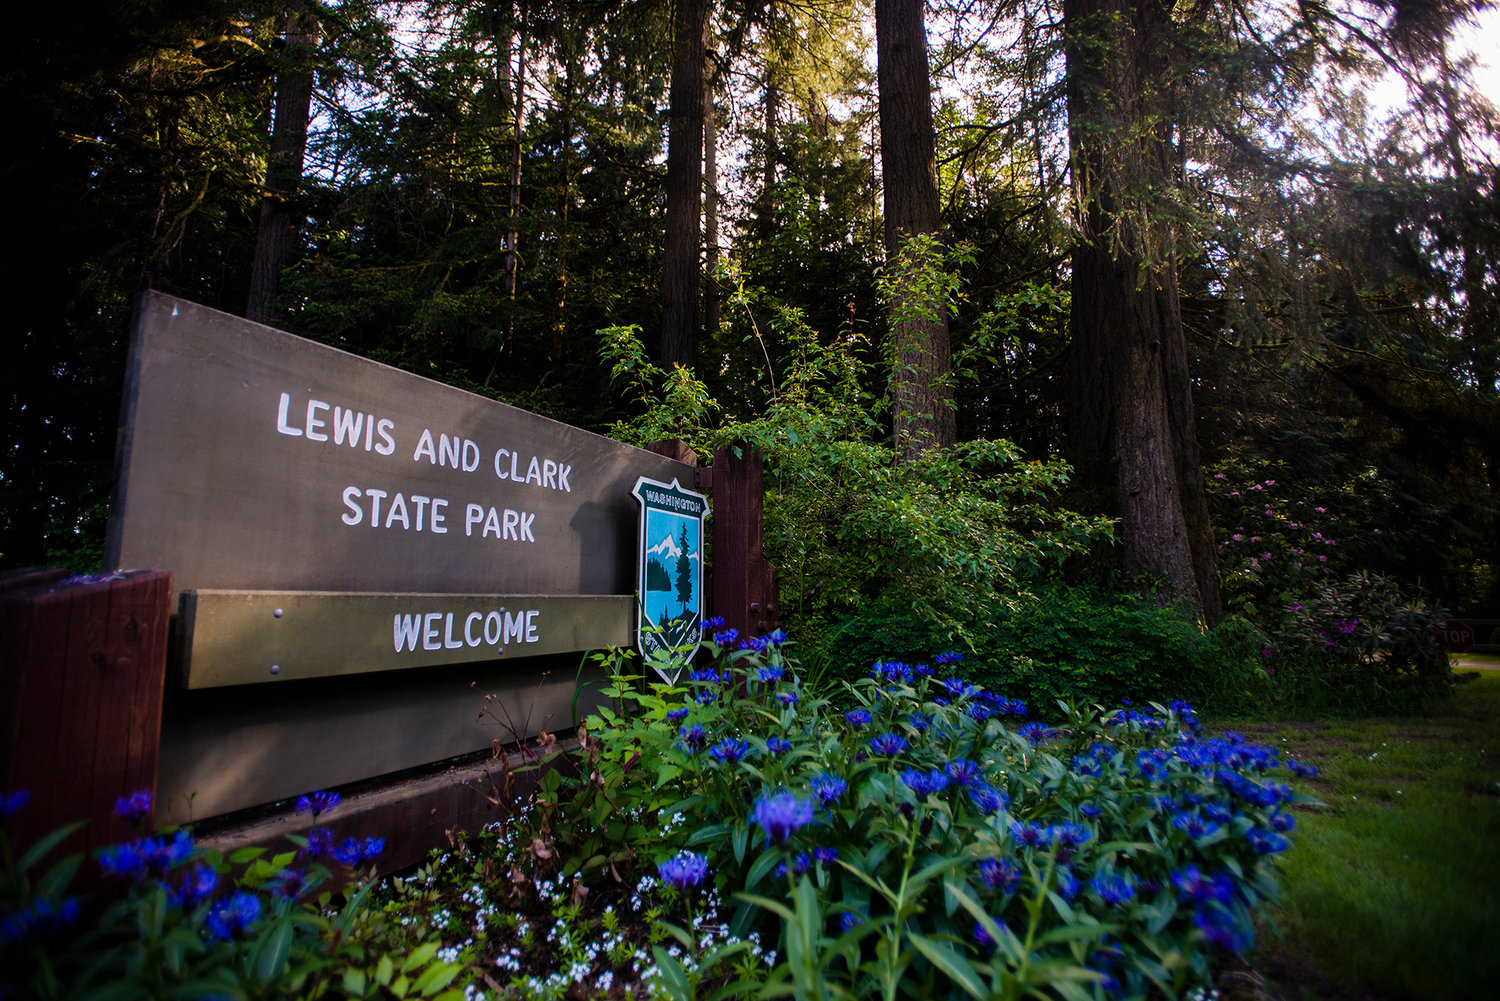 The entrance to Lewis and Clark State Park is seen along Jackson Highway.